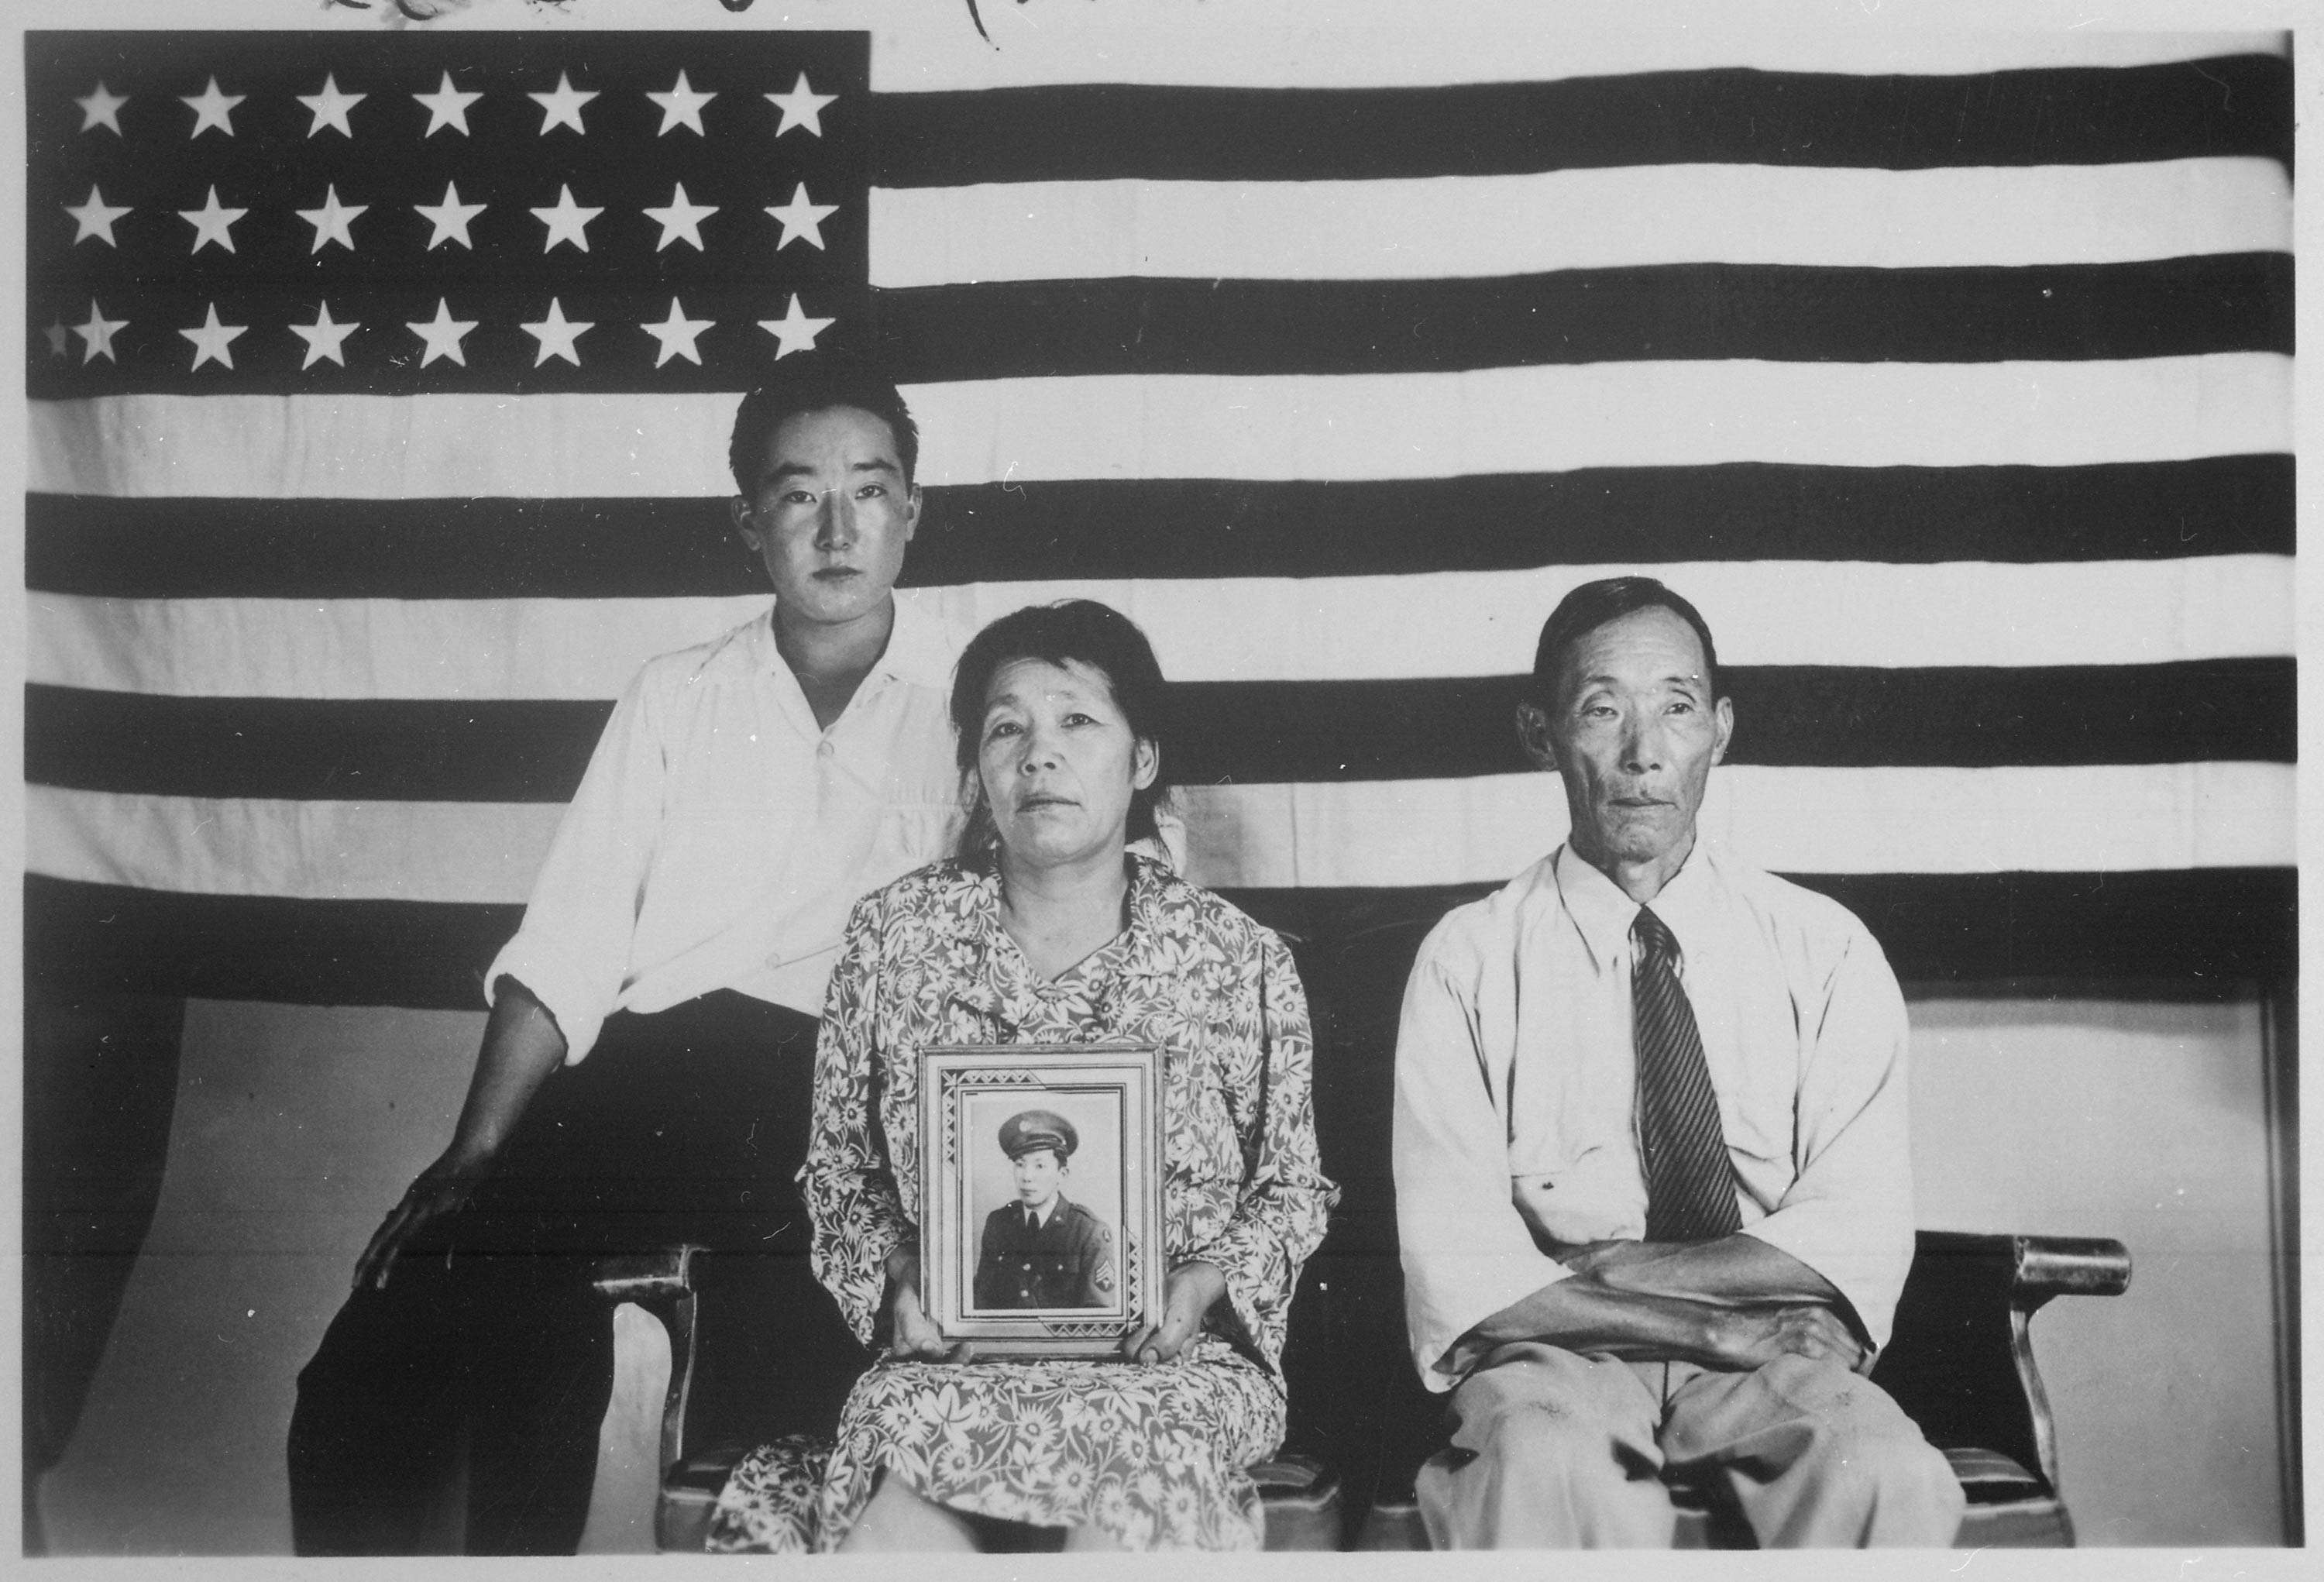 Hirano family pose in front of an American flag